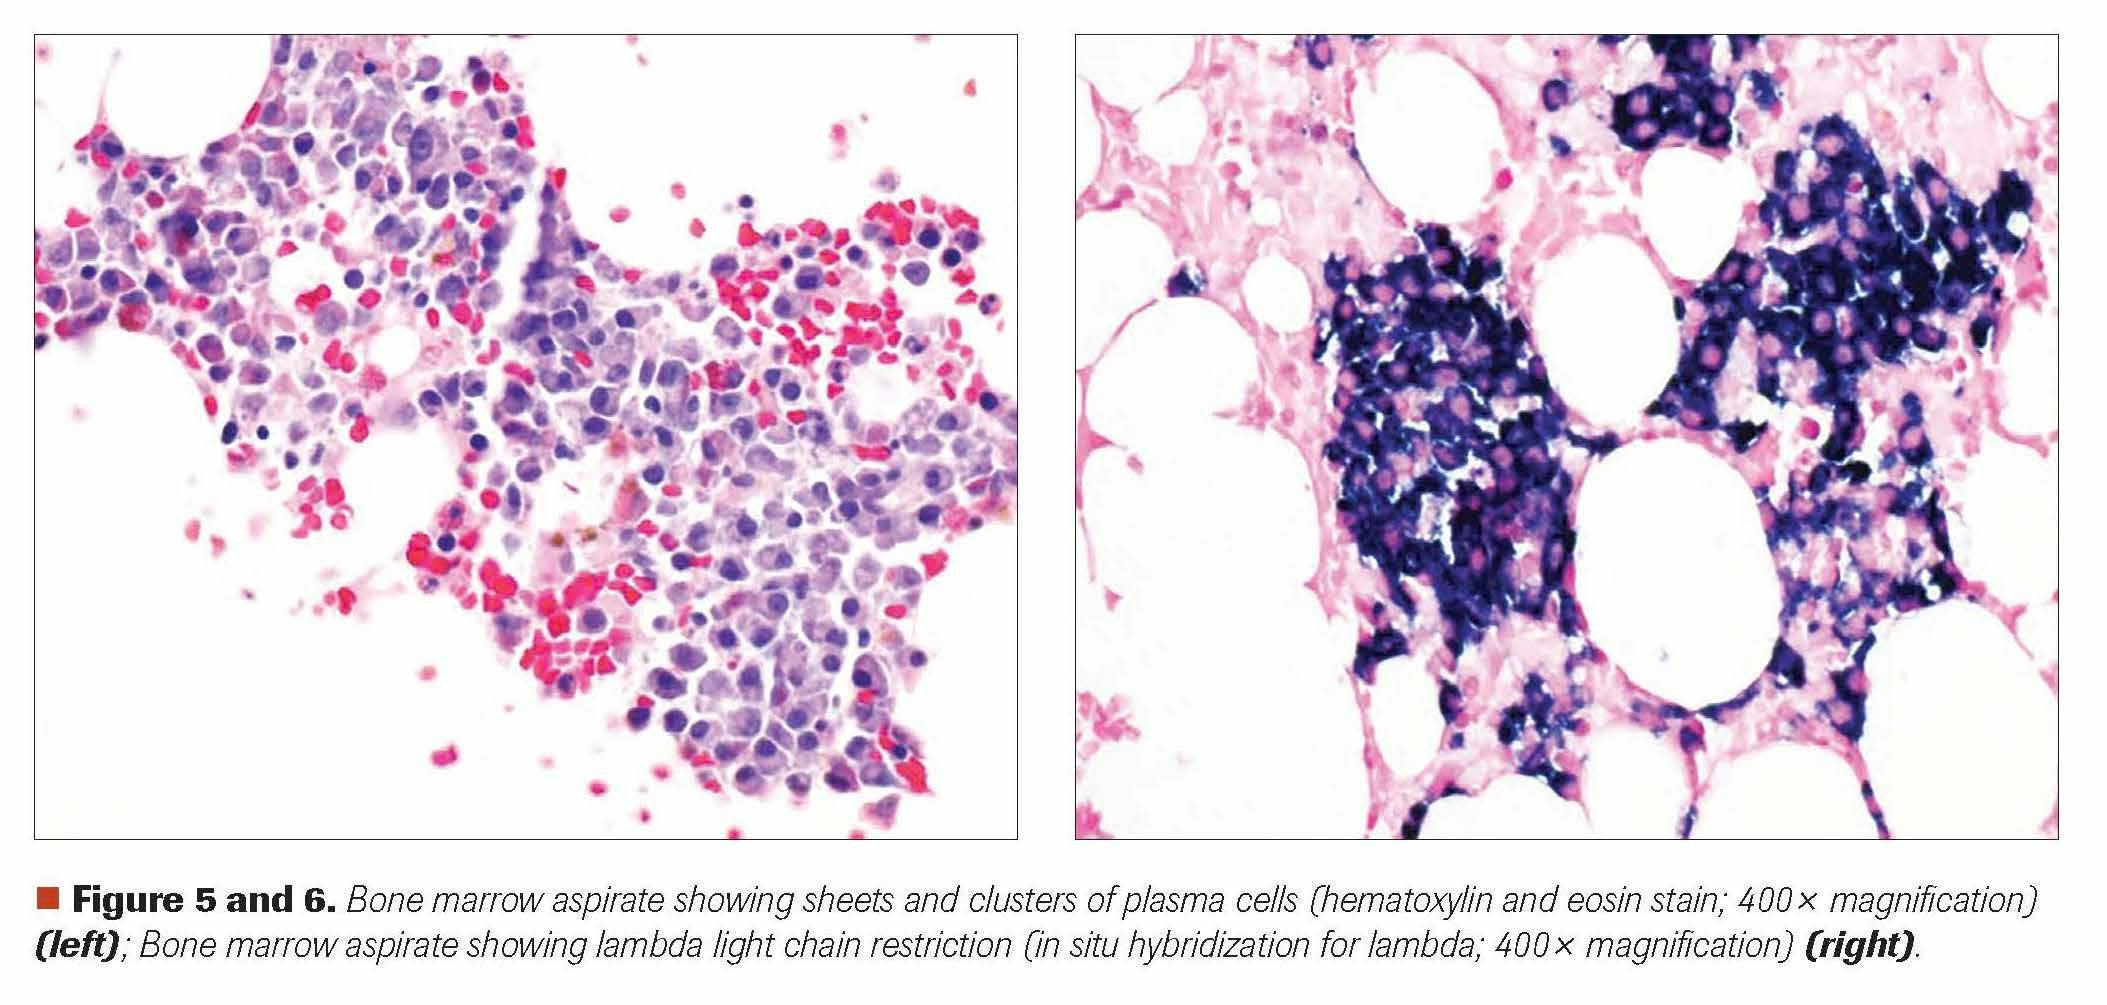 Figure 5 and 6. Bone marrow aspirate showing sheets and clusters of plasma cells (hematoxylin and eosin stain; 400x magnification) (left); Bone marrow aspirate showing lambda light chain restriction (in situ hybridization for lambda; 400x magnification) (right).